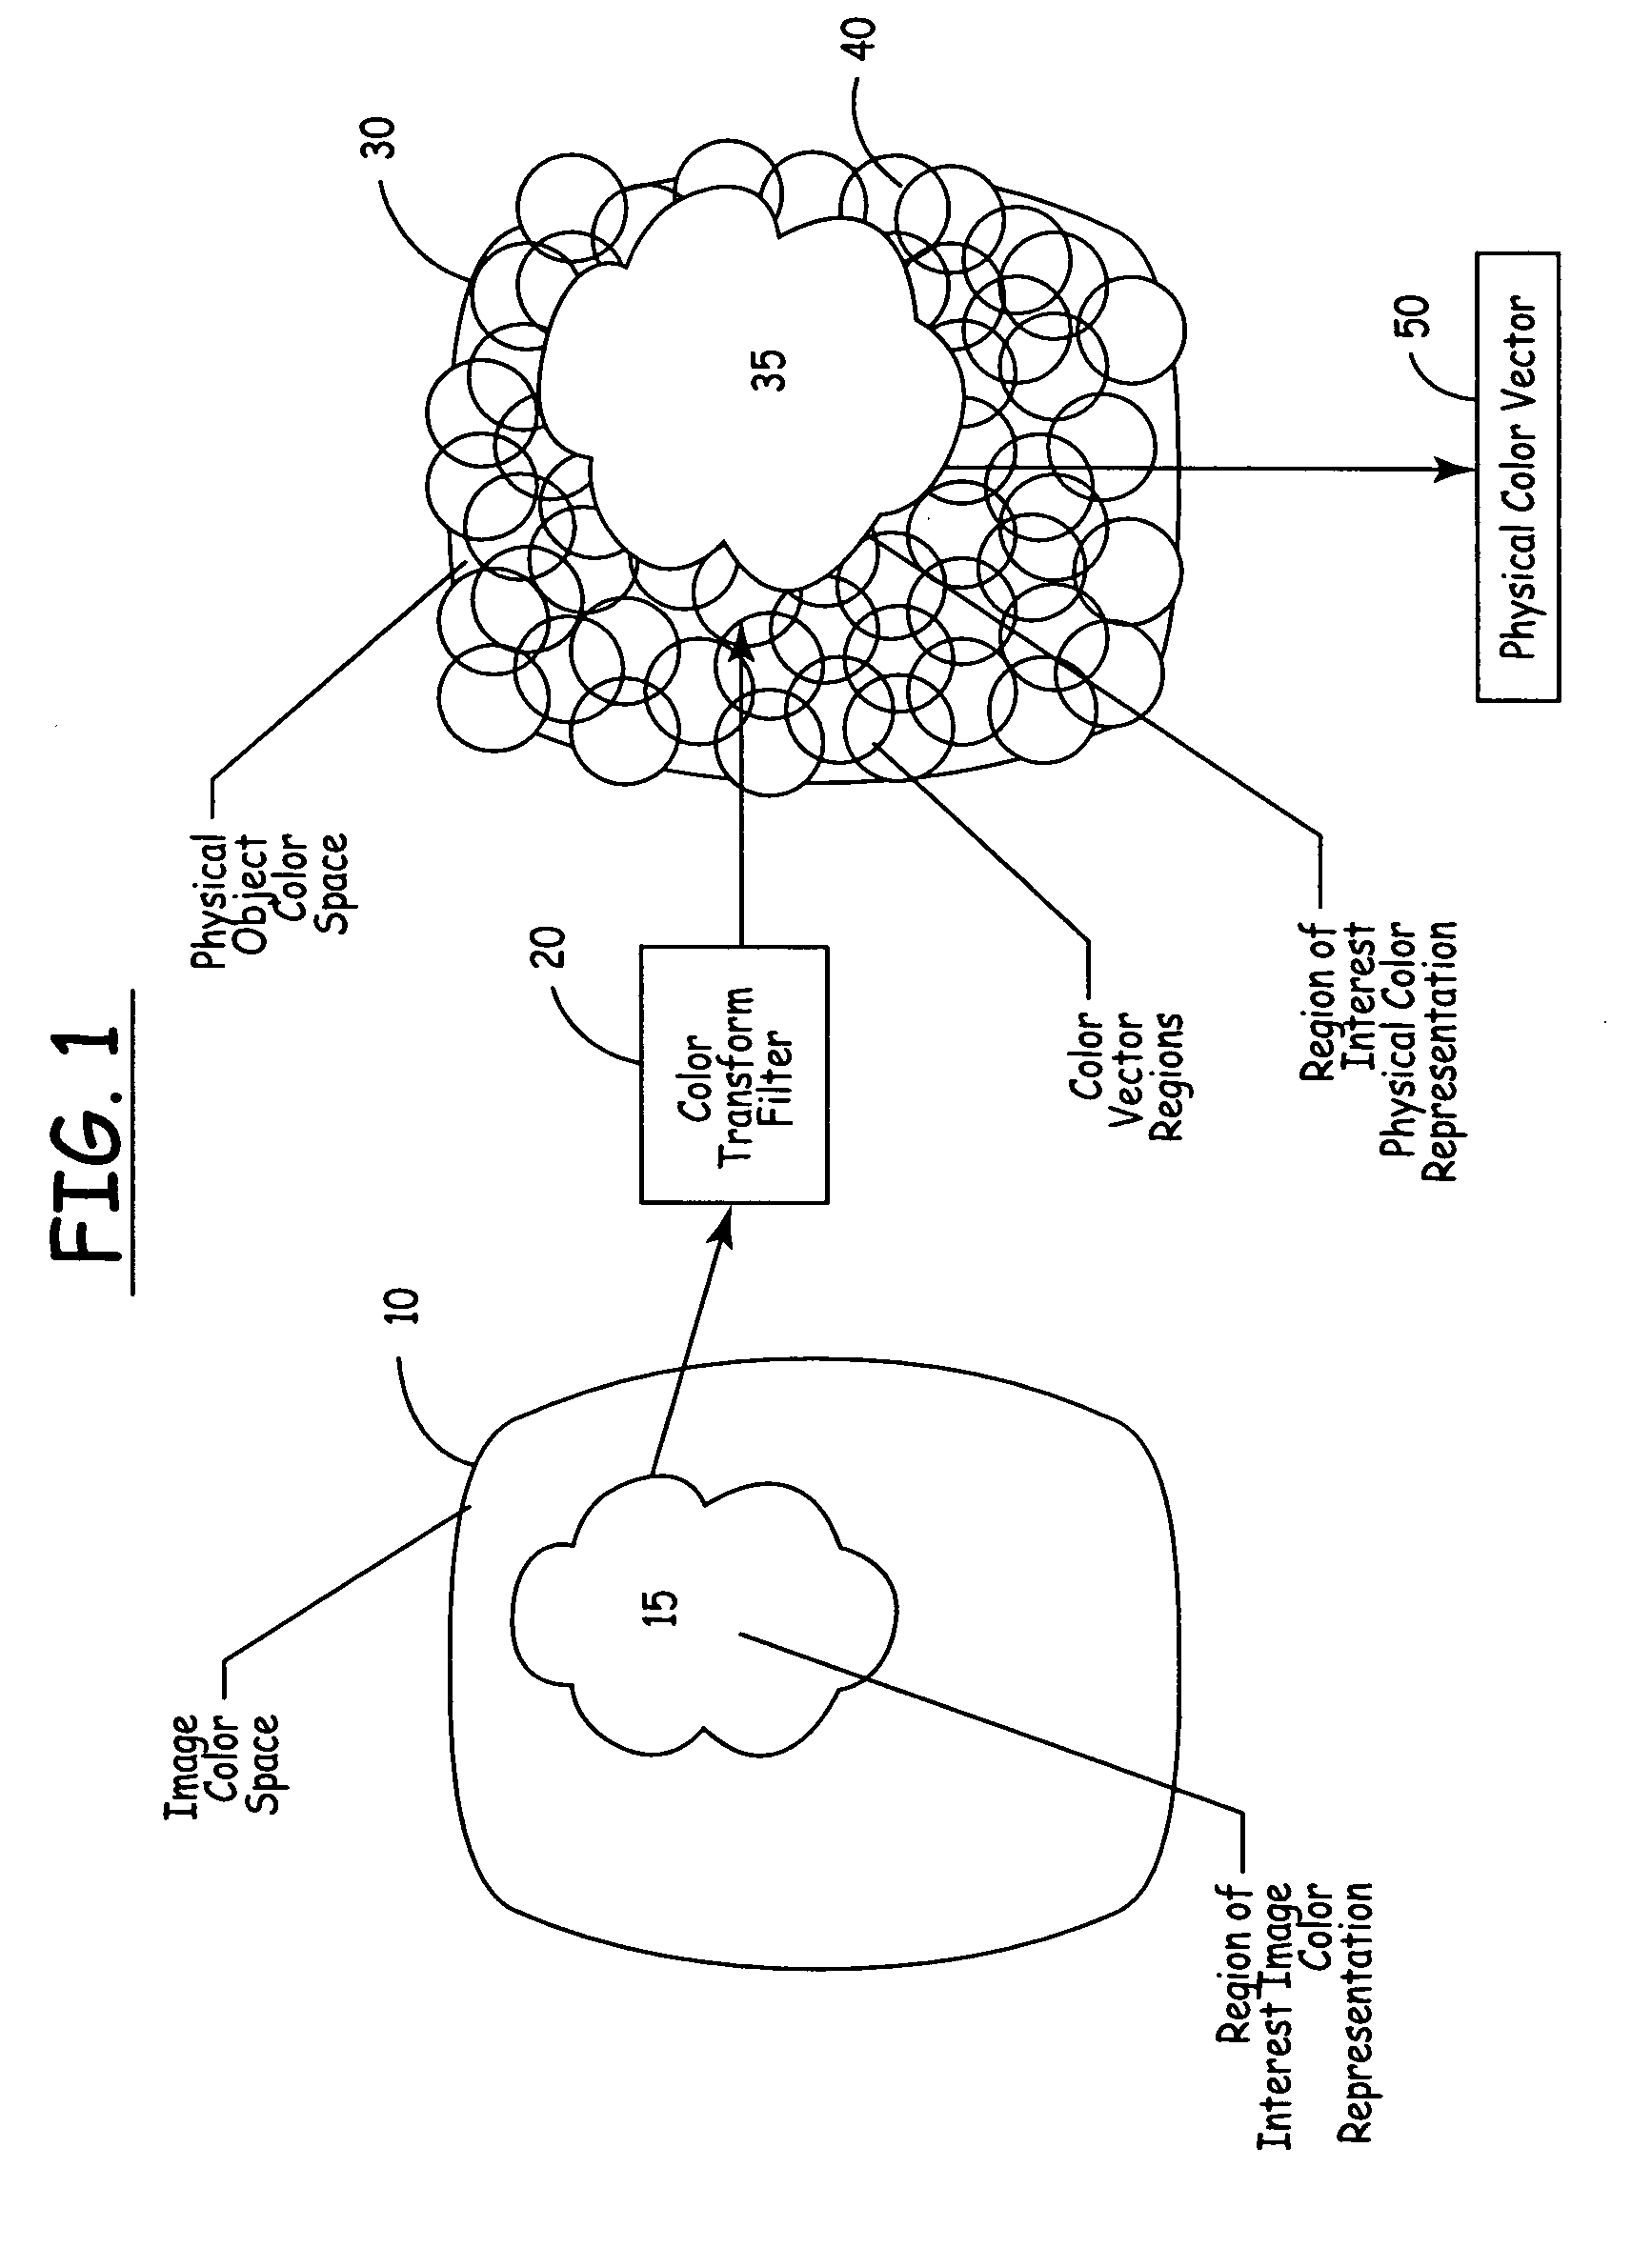 Methods and apparatus for automated true object-based image analysis and retrieval